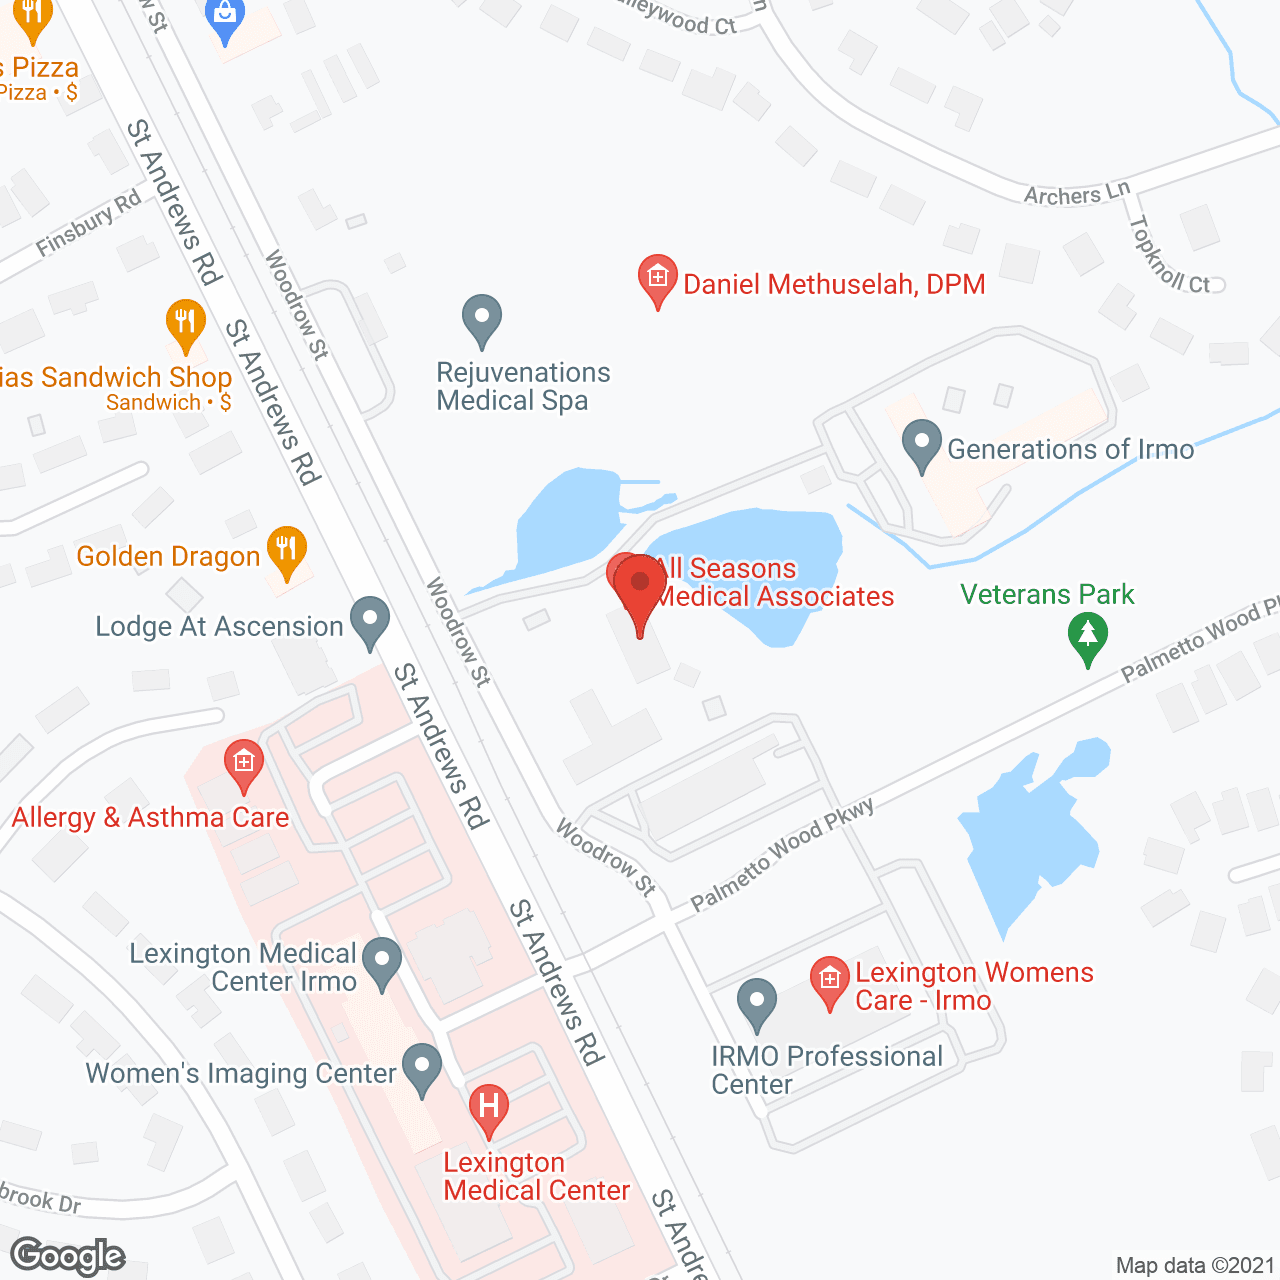 The Lodge at Ascension in google map